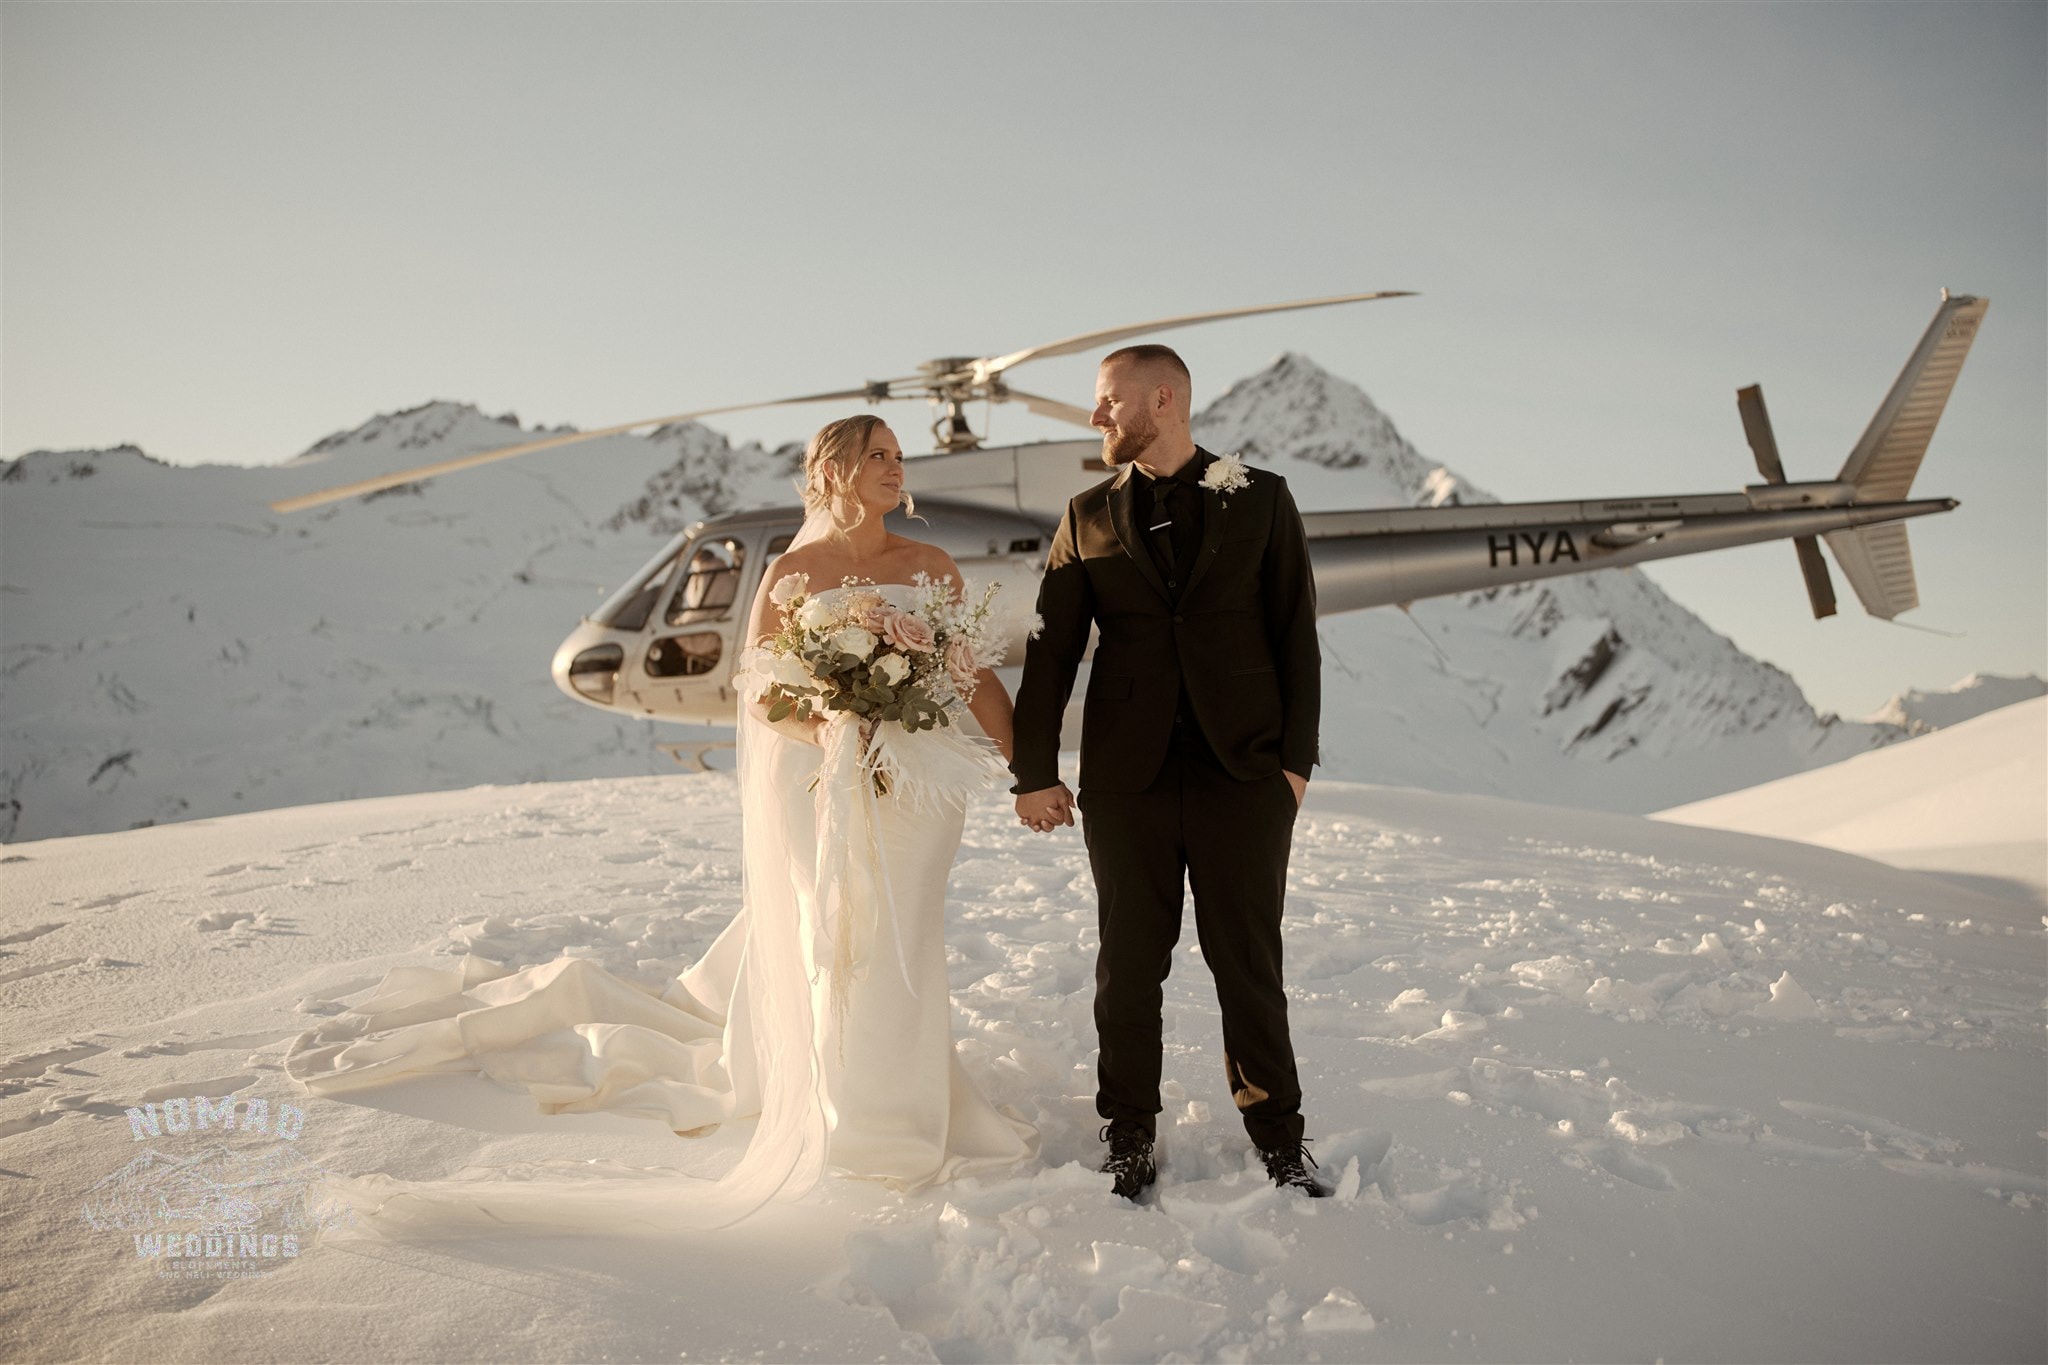 Jay and Dave's Coromandel Peak Heli Elopement Wedding features a bride and groom standing in front of a helicopter.